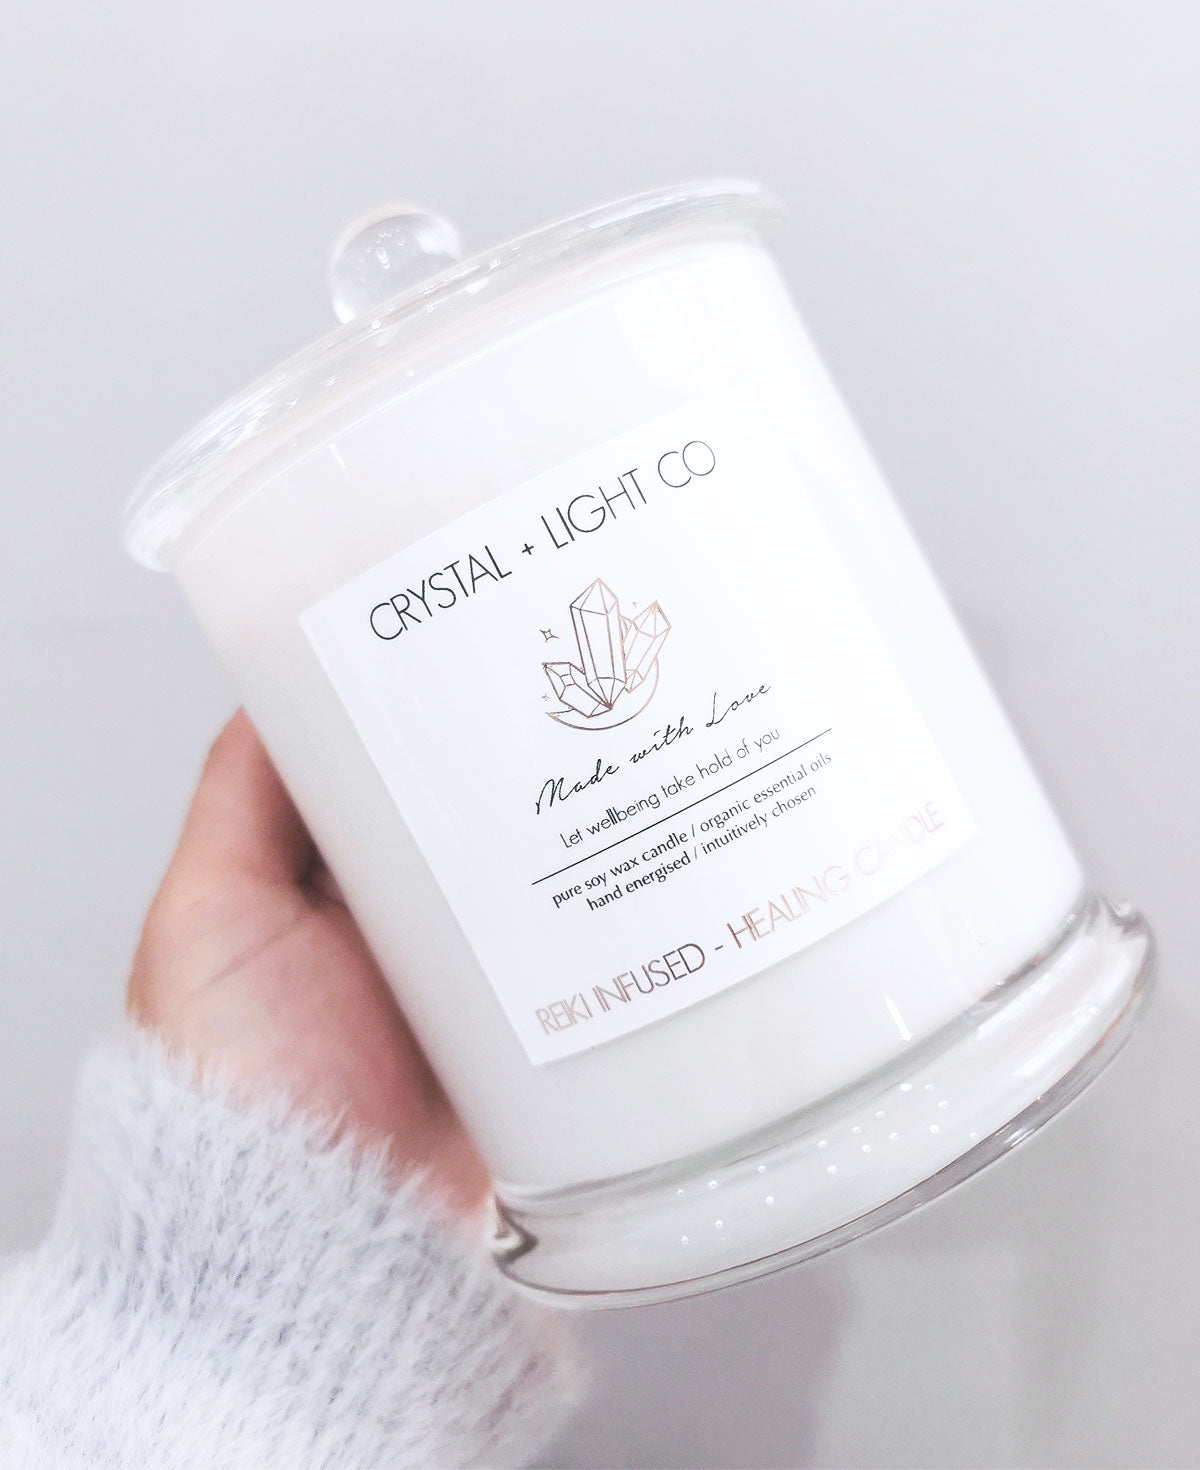 Christmas Spice - Lrg Healing candle